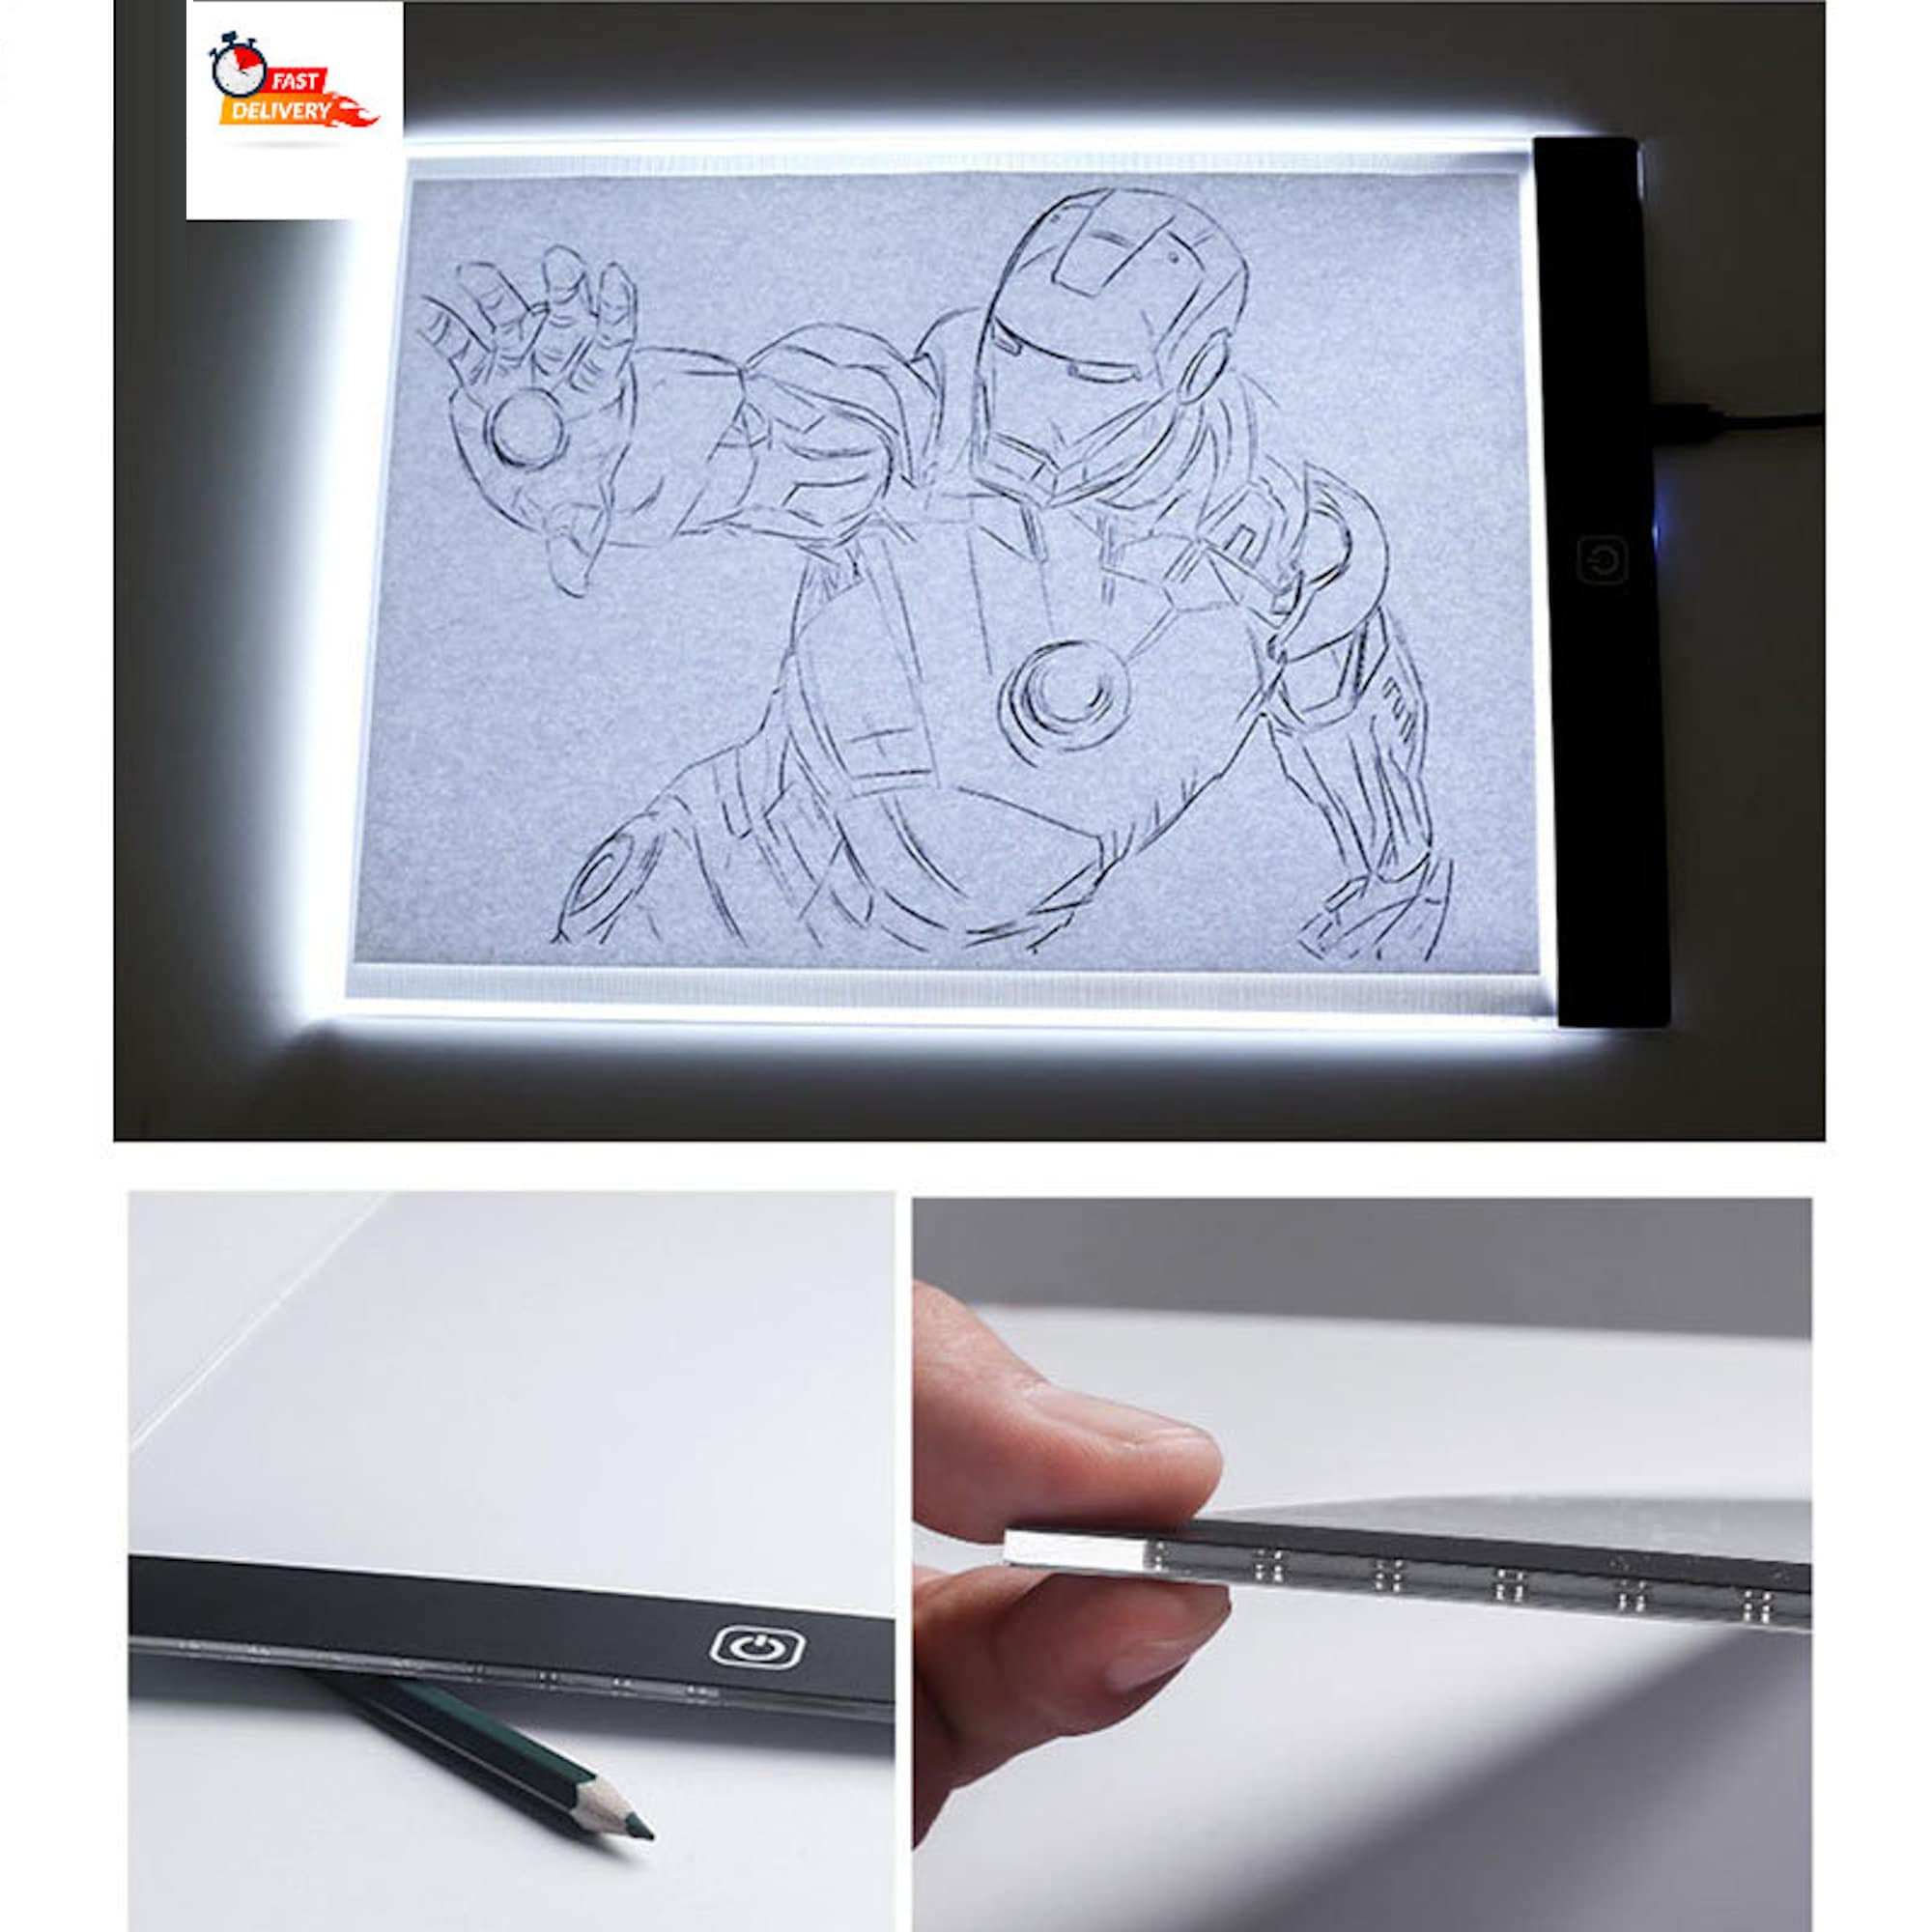 A4 Light Box for Tracing lightbox Tracer Light Board for Diamond Painting Art Ultra Thin Light Pad for Drawing Sketching Animation Stencilling with 2 Magnetic Pins 2nd GEN Light pad-A4M 